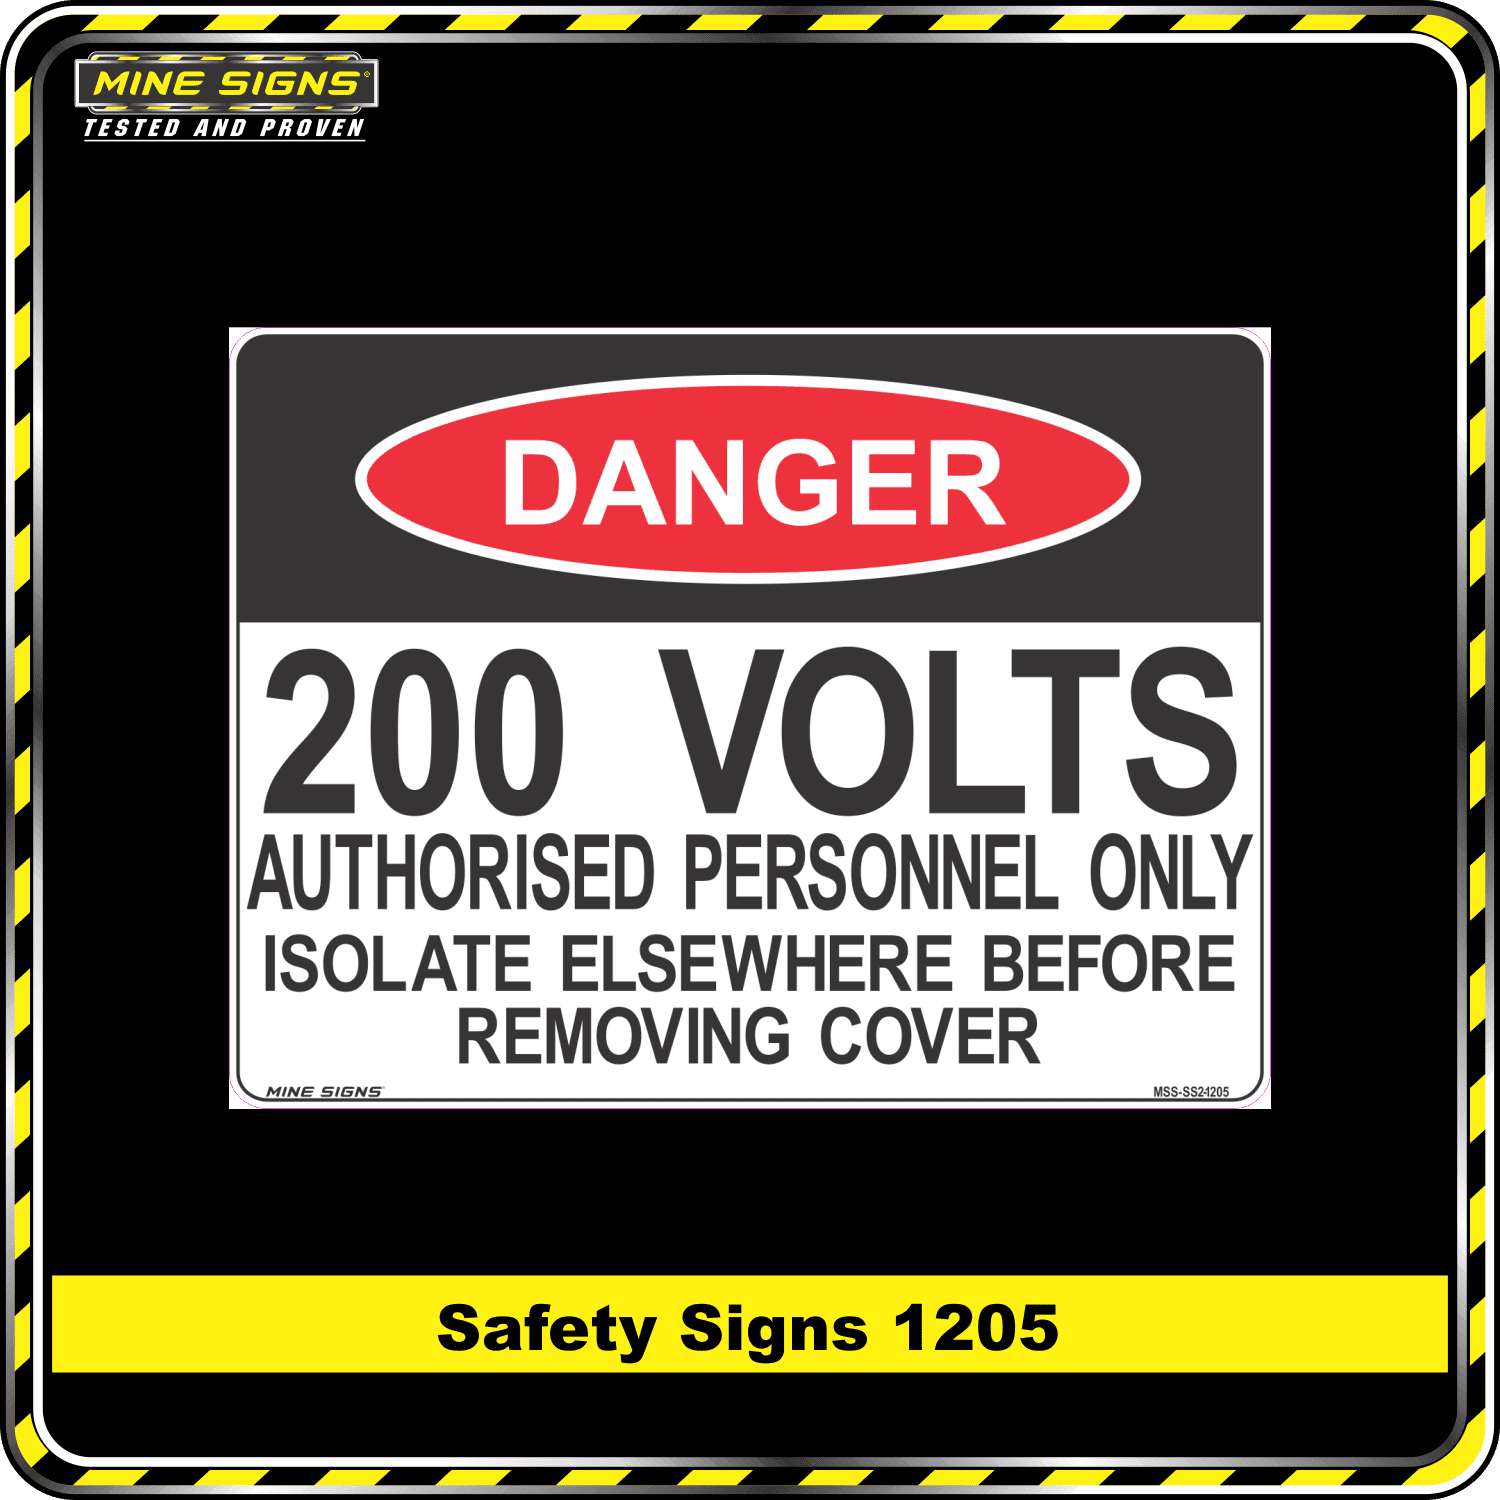 danger 200 volts authorised personnel only isolate elsewhere before removing cover